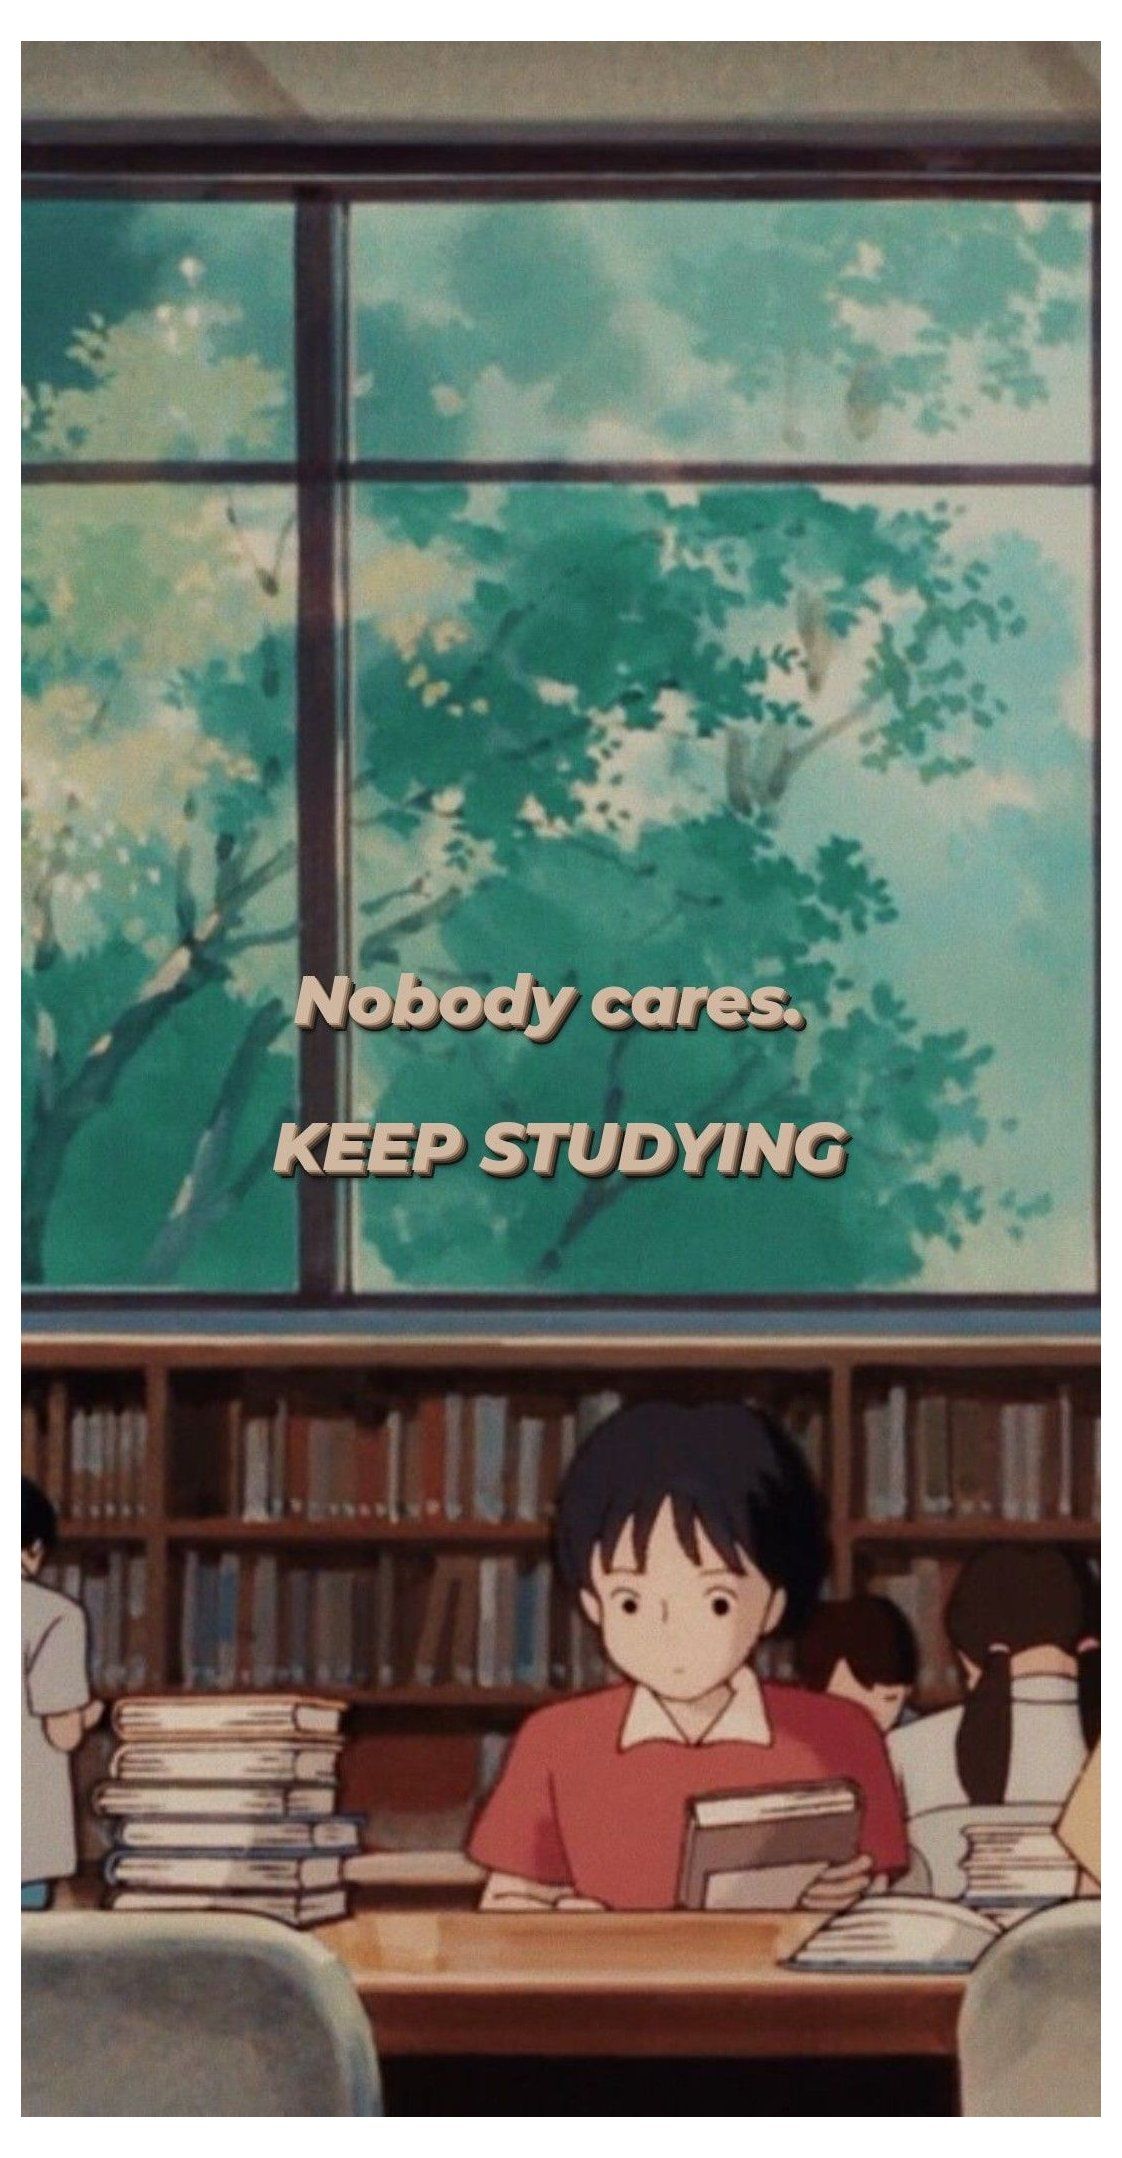 anime wallpaper studying quotes #study #anime #aesthetic #studyanimeaesthetic. Anime wallpaper, Anime scenery wallpaper, Study